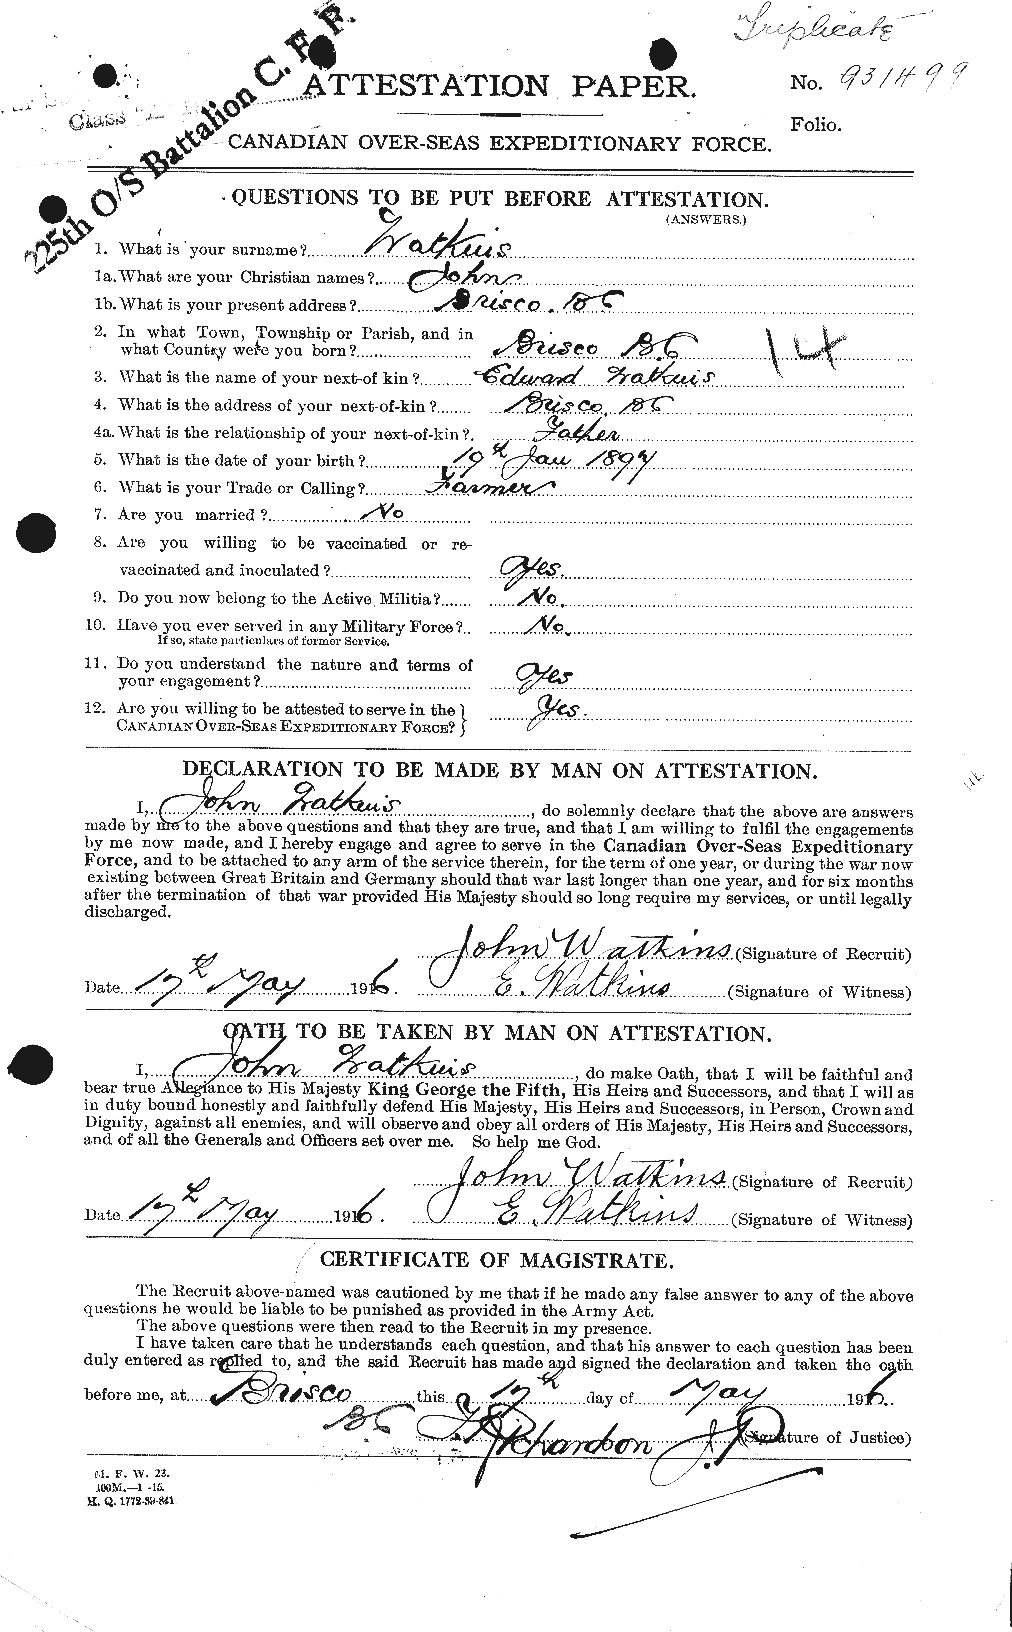 Personnel Records of the First World War - CEF 659250a